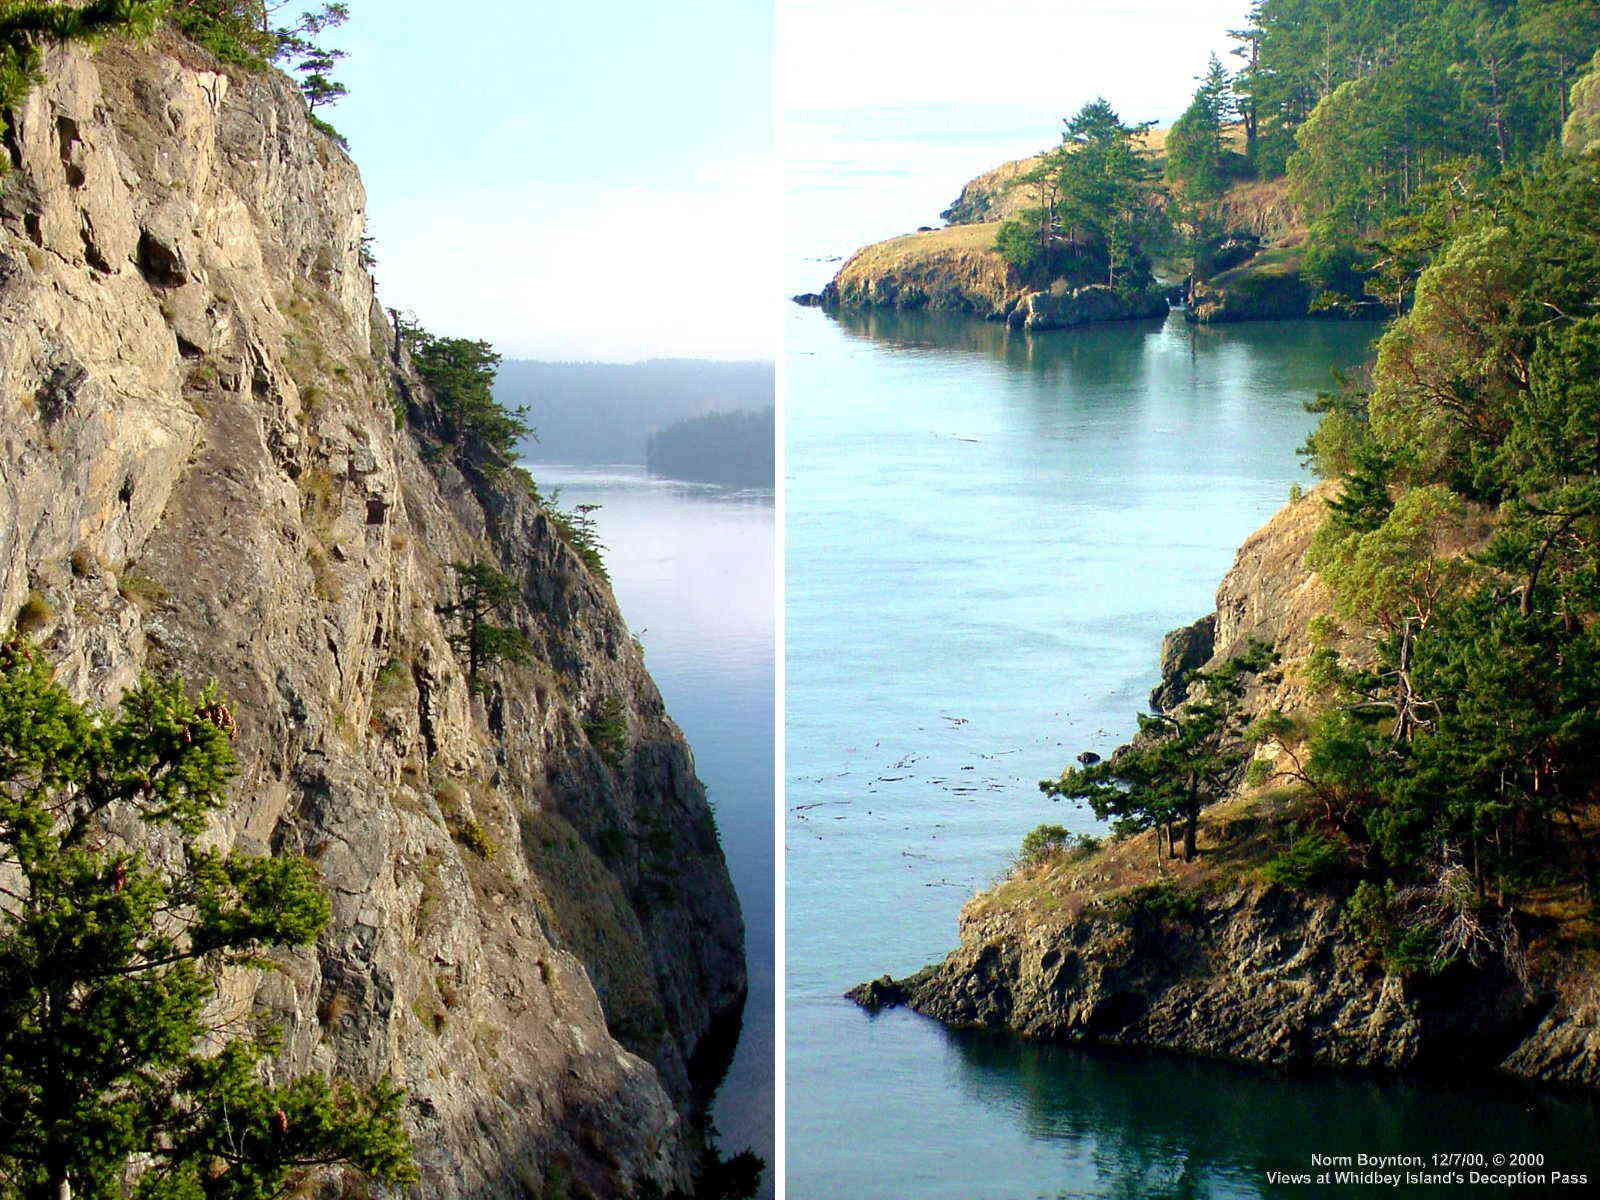 Views at Deception Pass on Whidbey Island - 1600 x 1200